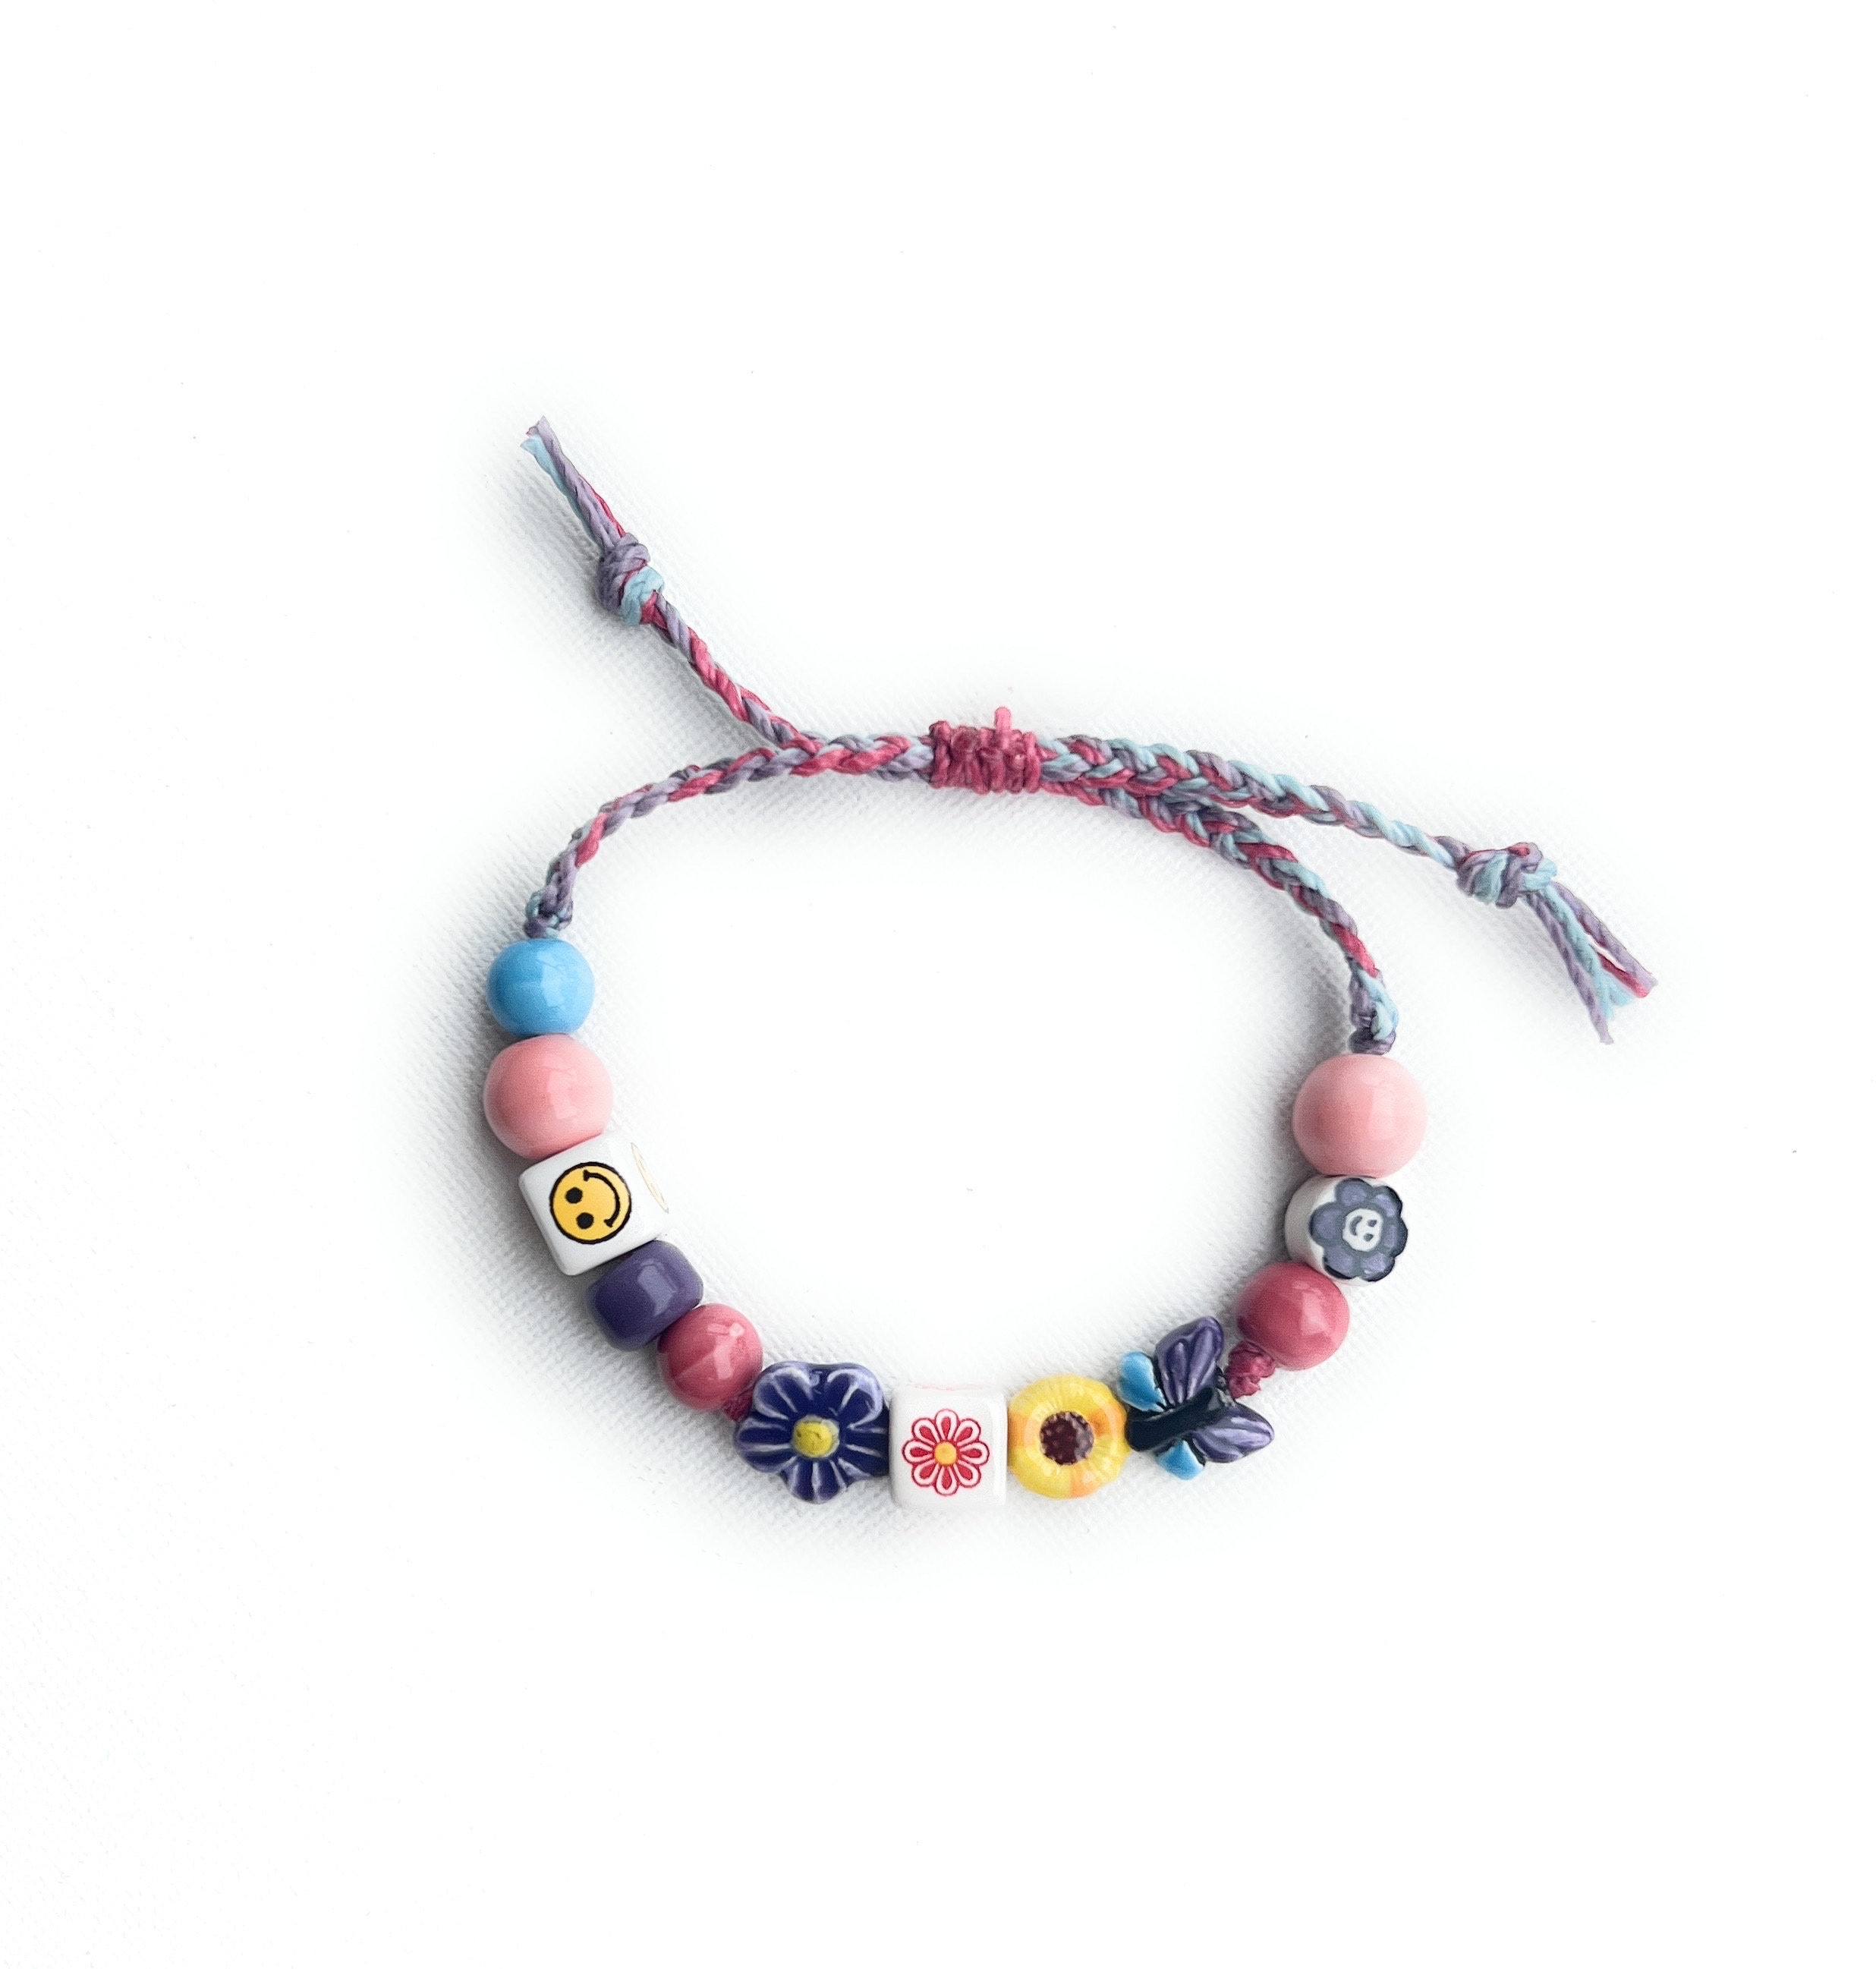 Strand Gojo And Geto Satosugu Anime Bracelets With Matching Y2K Bracelet  Beads And Charms For Couples From Simonanry, $12.49 | DHgate.Com